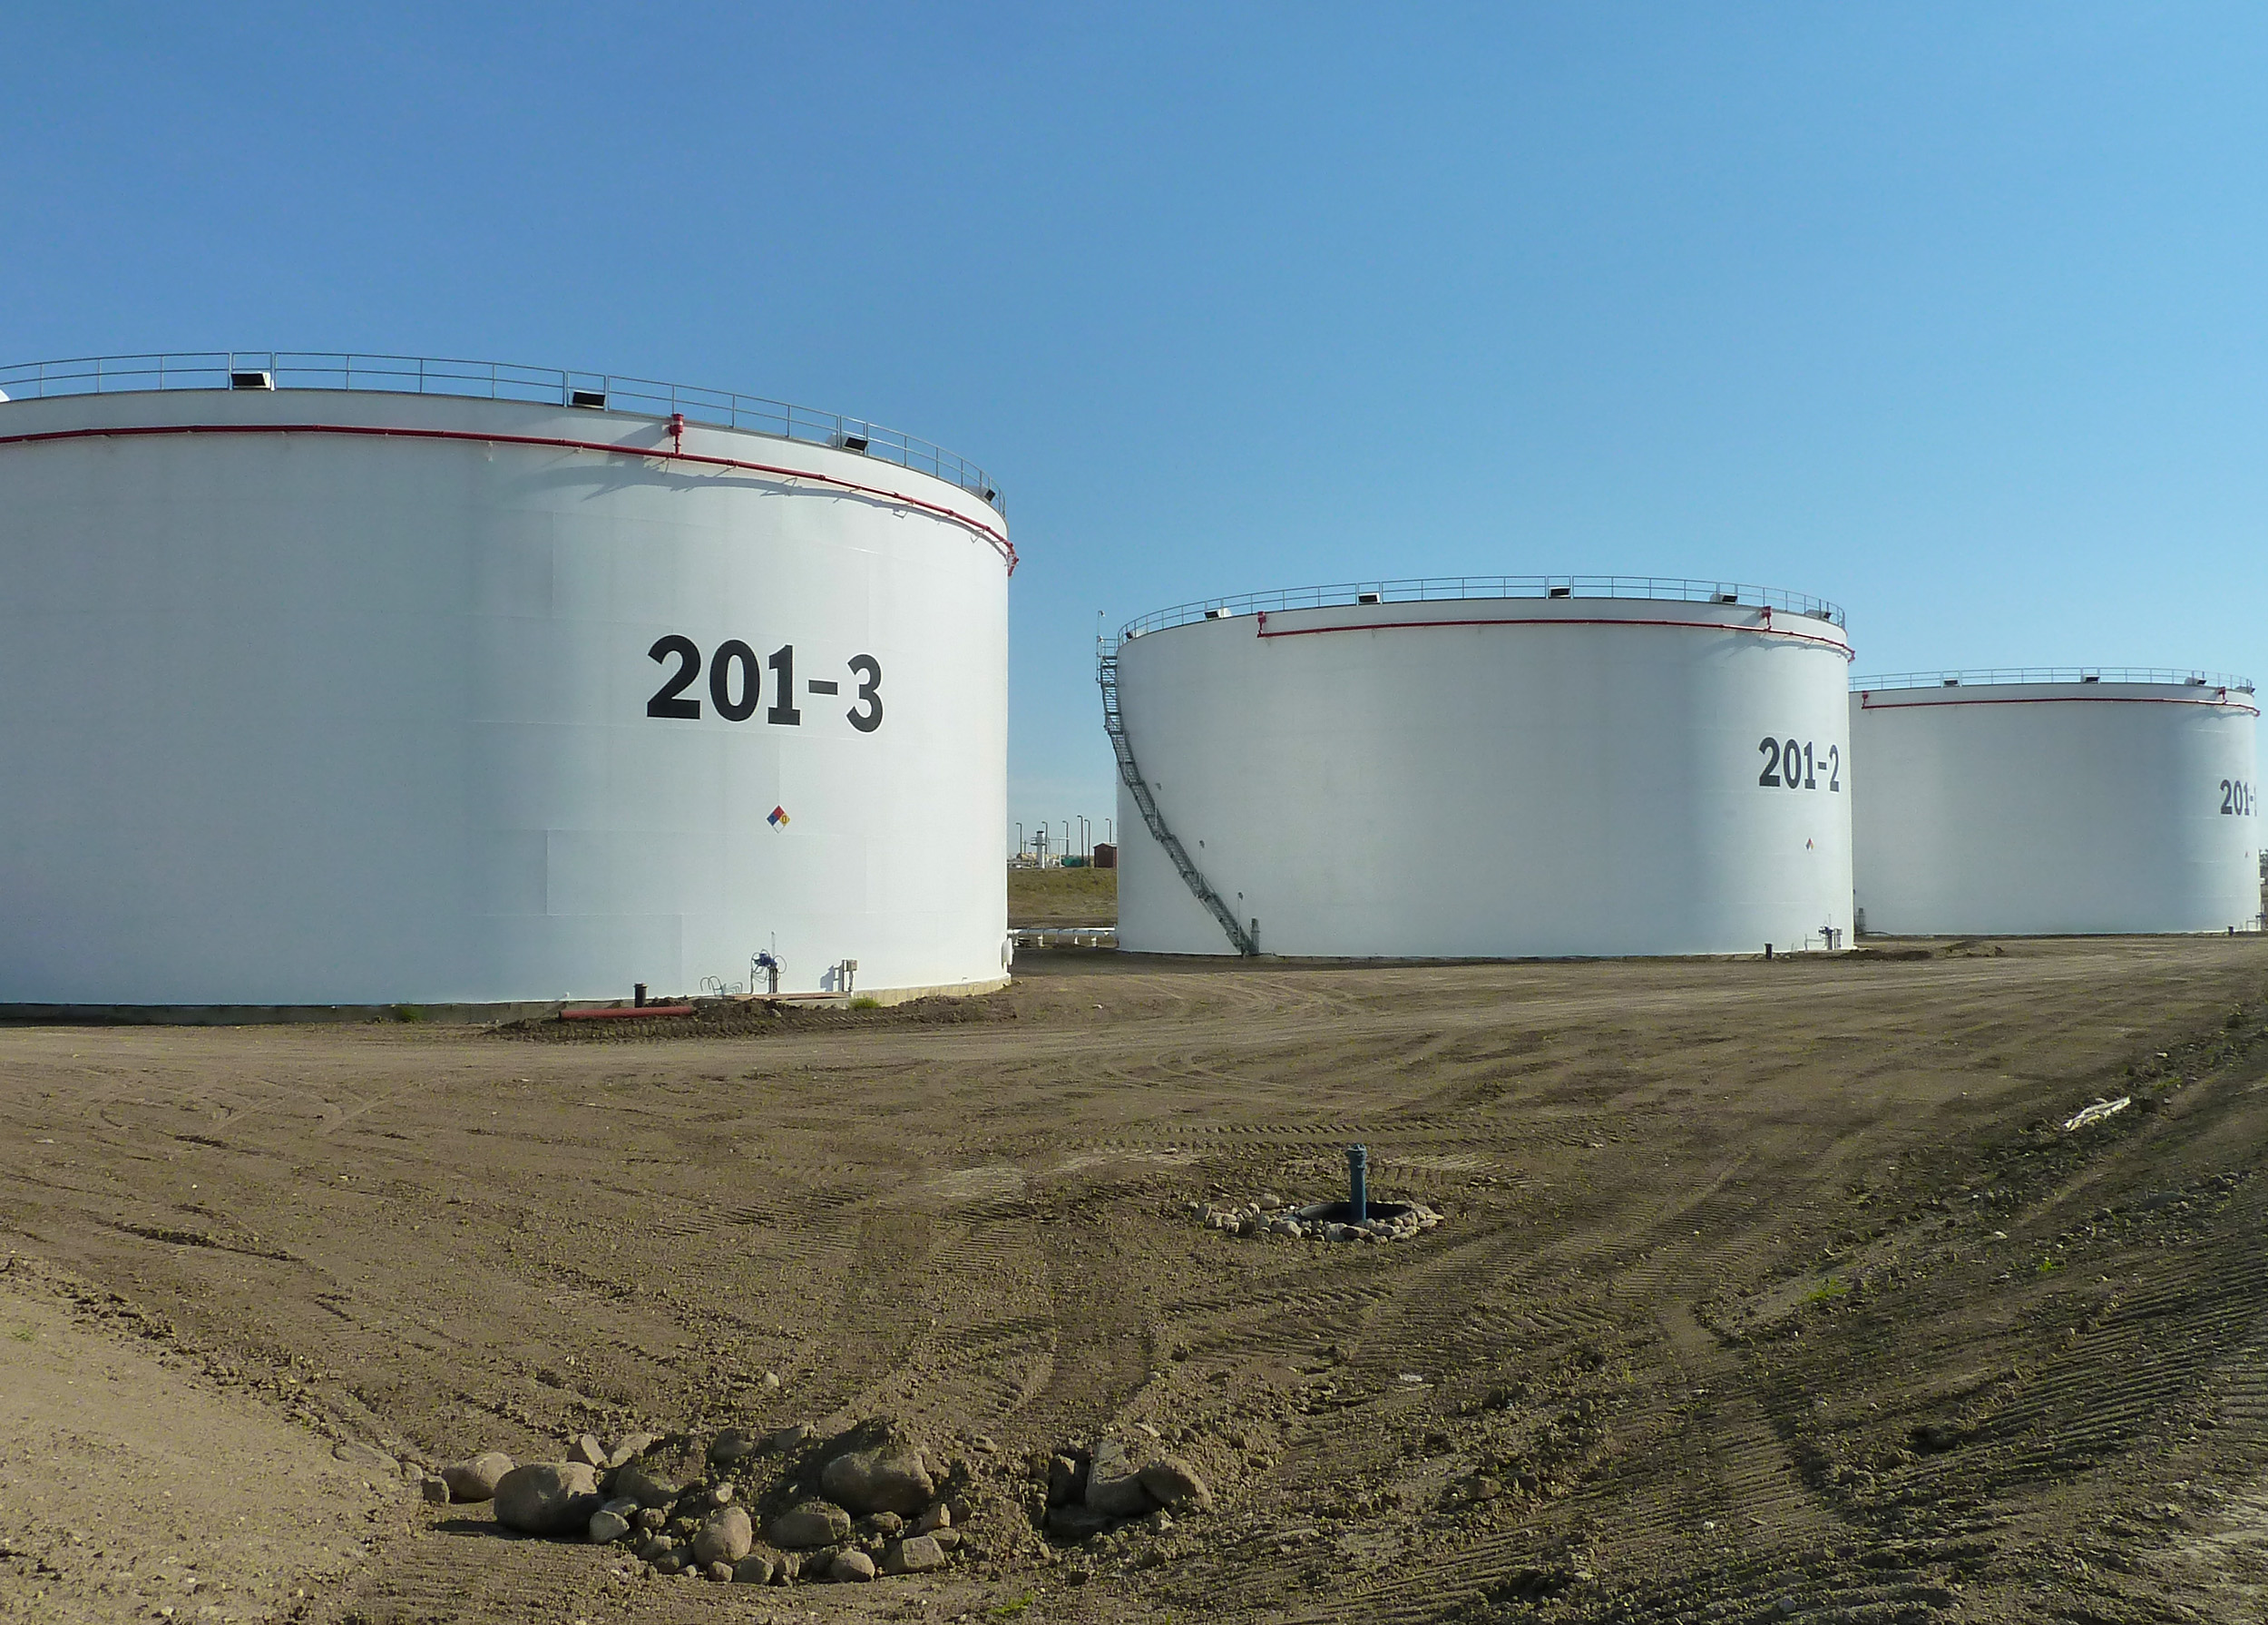 Storage tanks range in size from 125,000 Bbls to 150,000 Bbls.